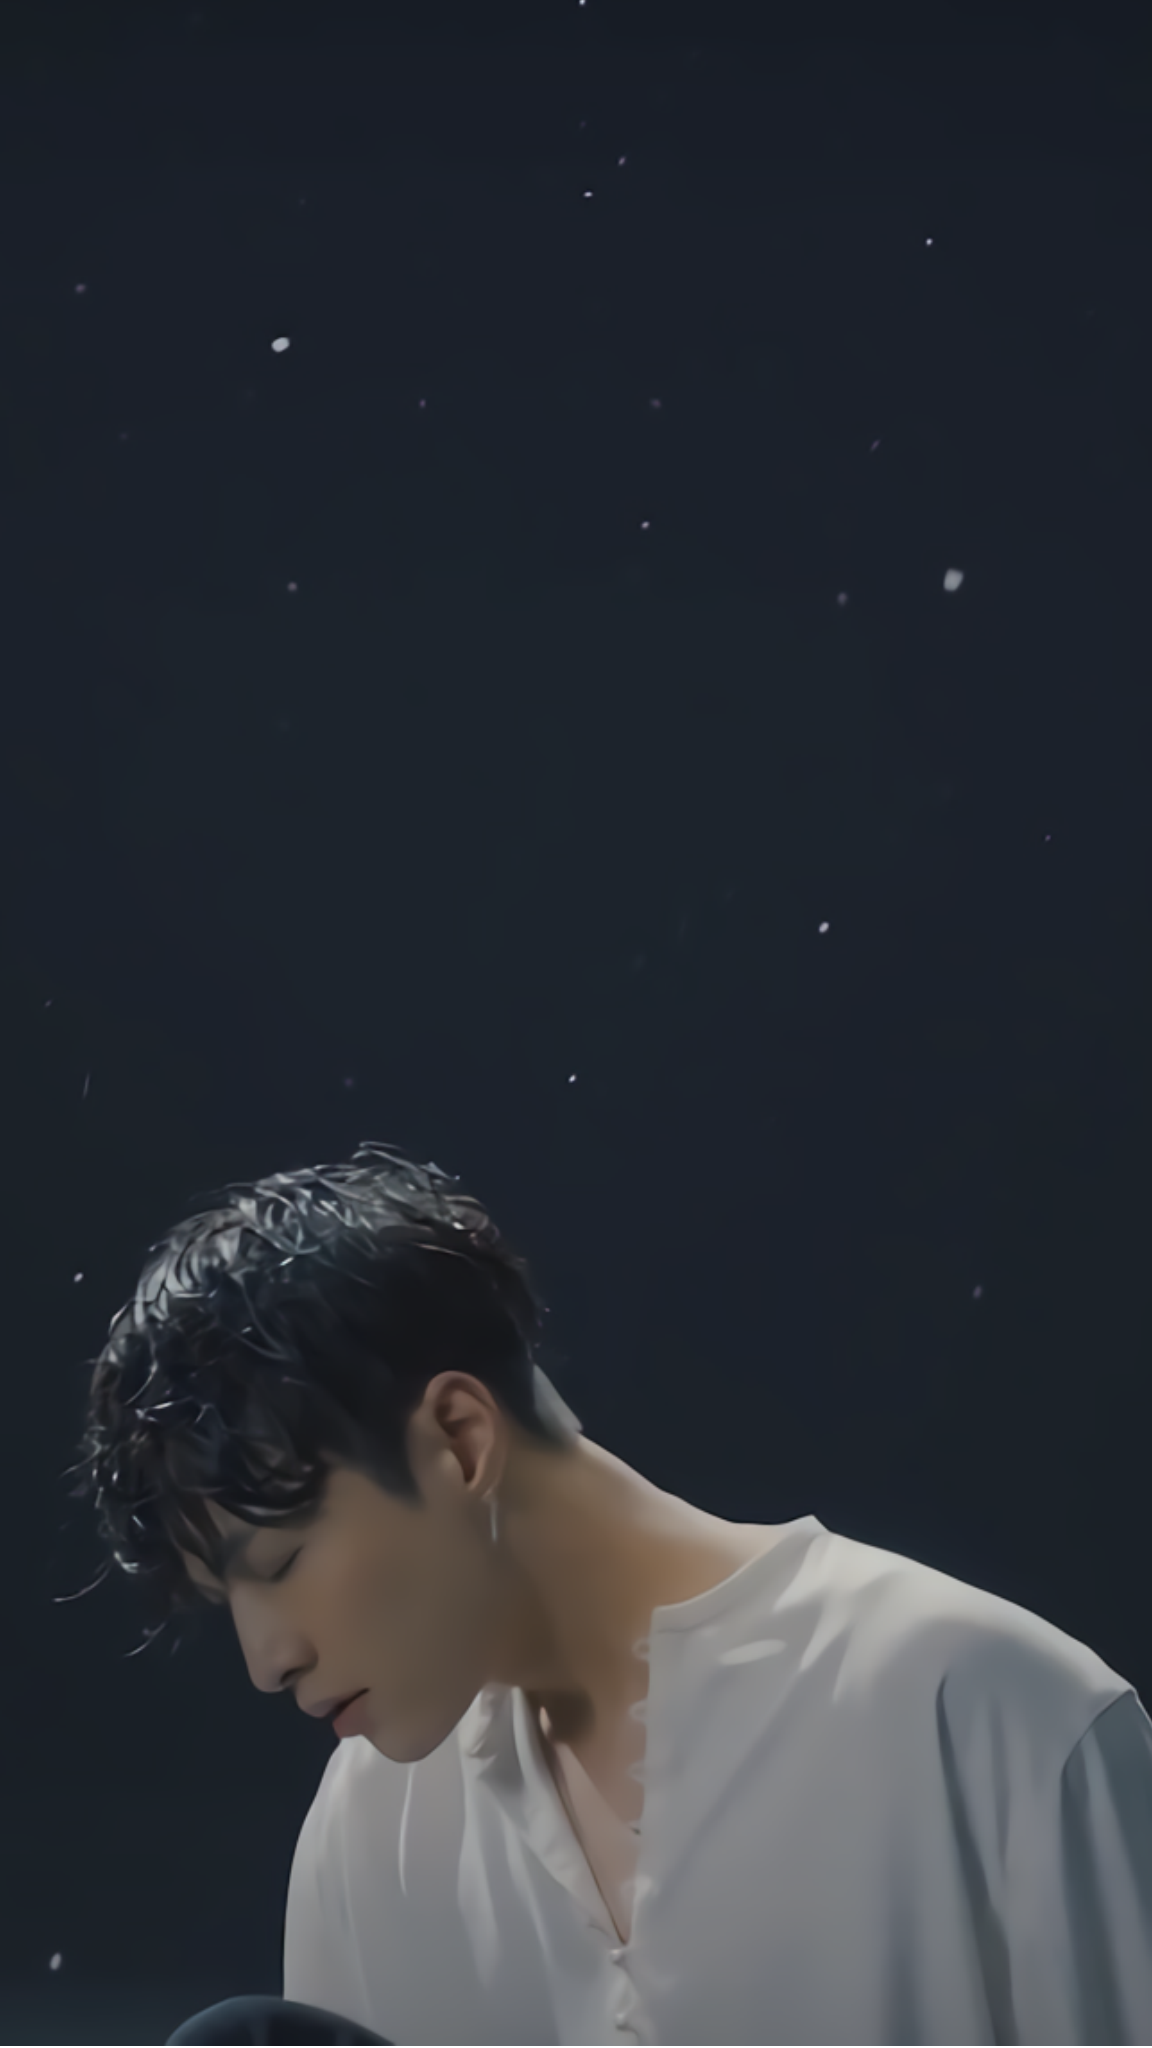 Exo Lay Wallpapers